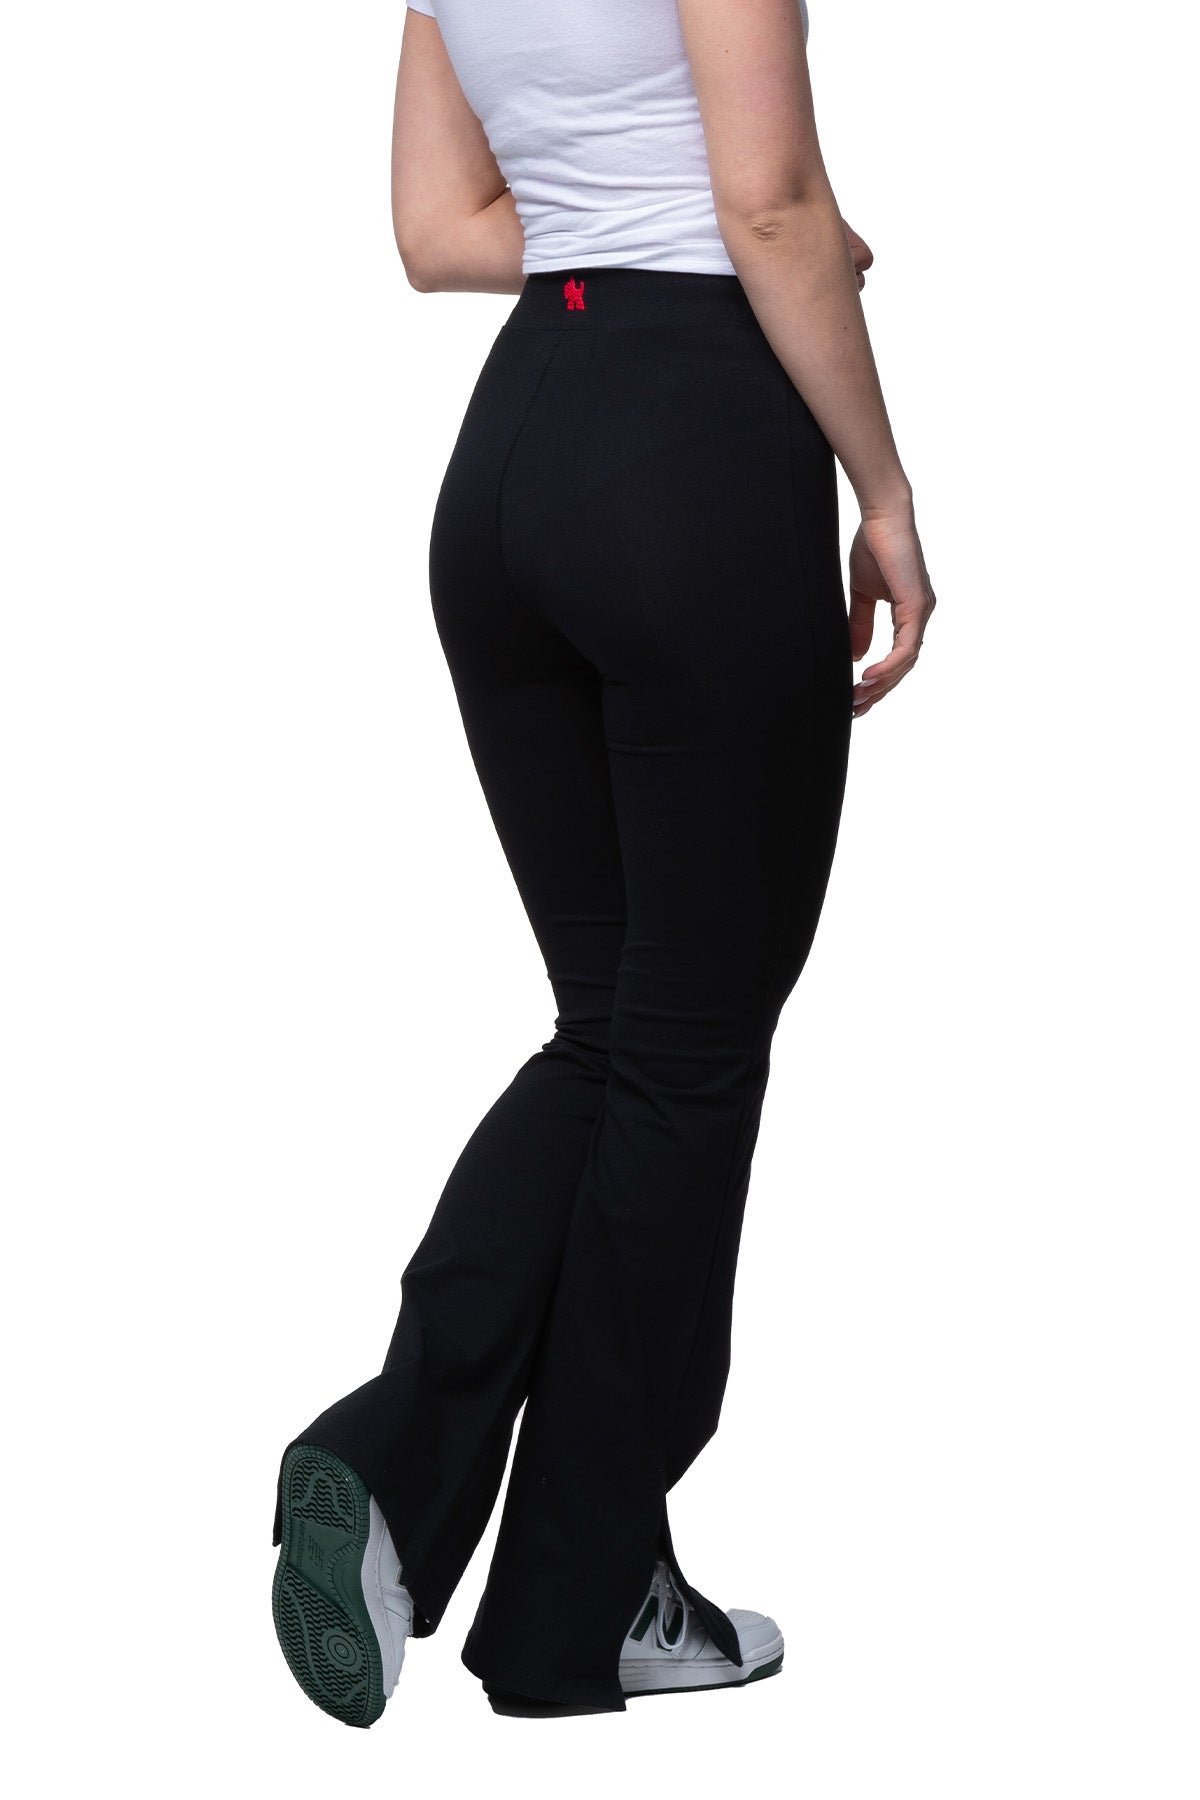 Tori - Flared Pant with Slit